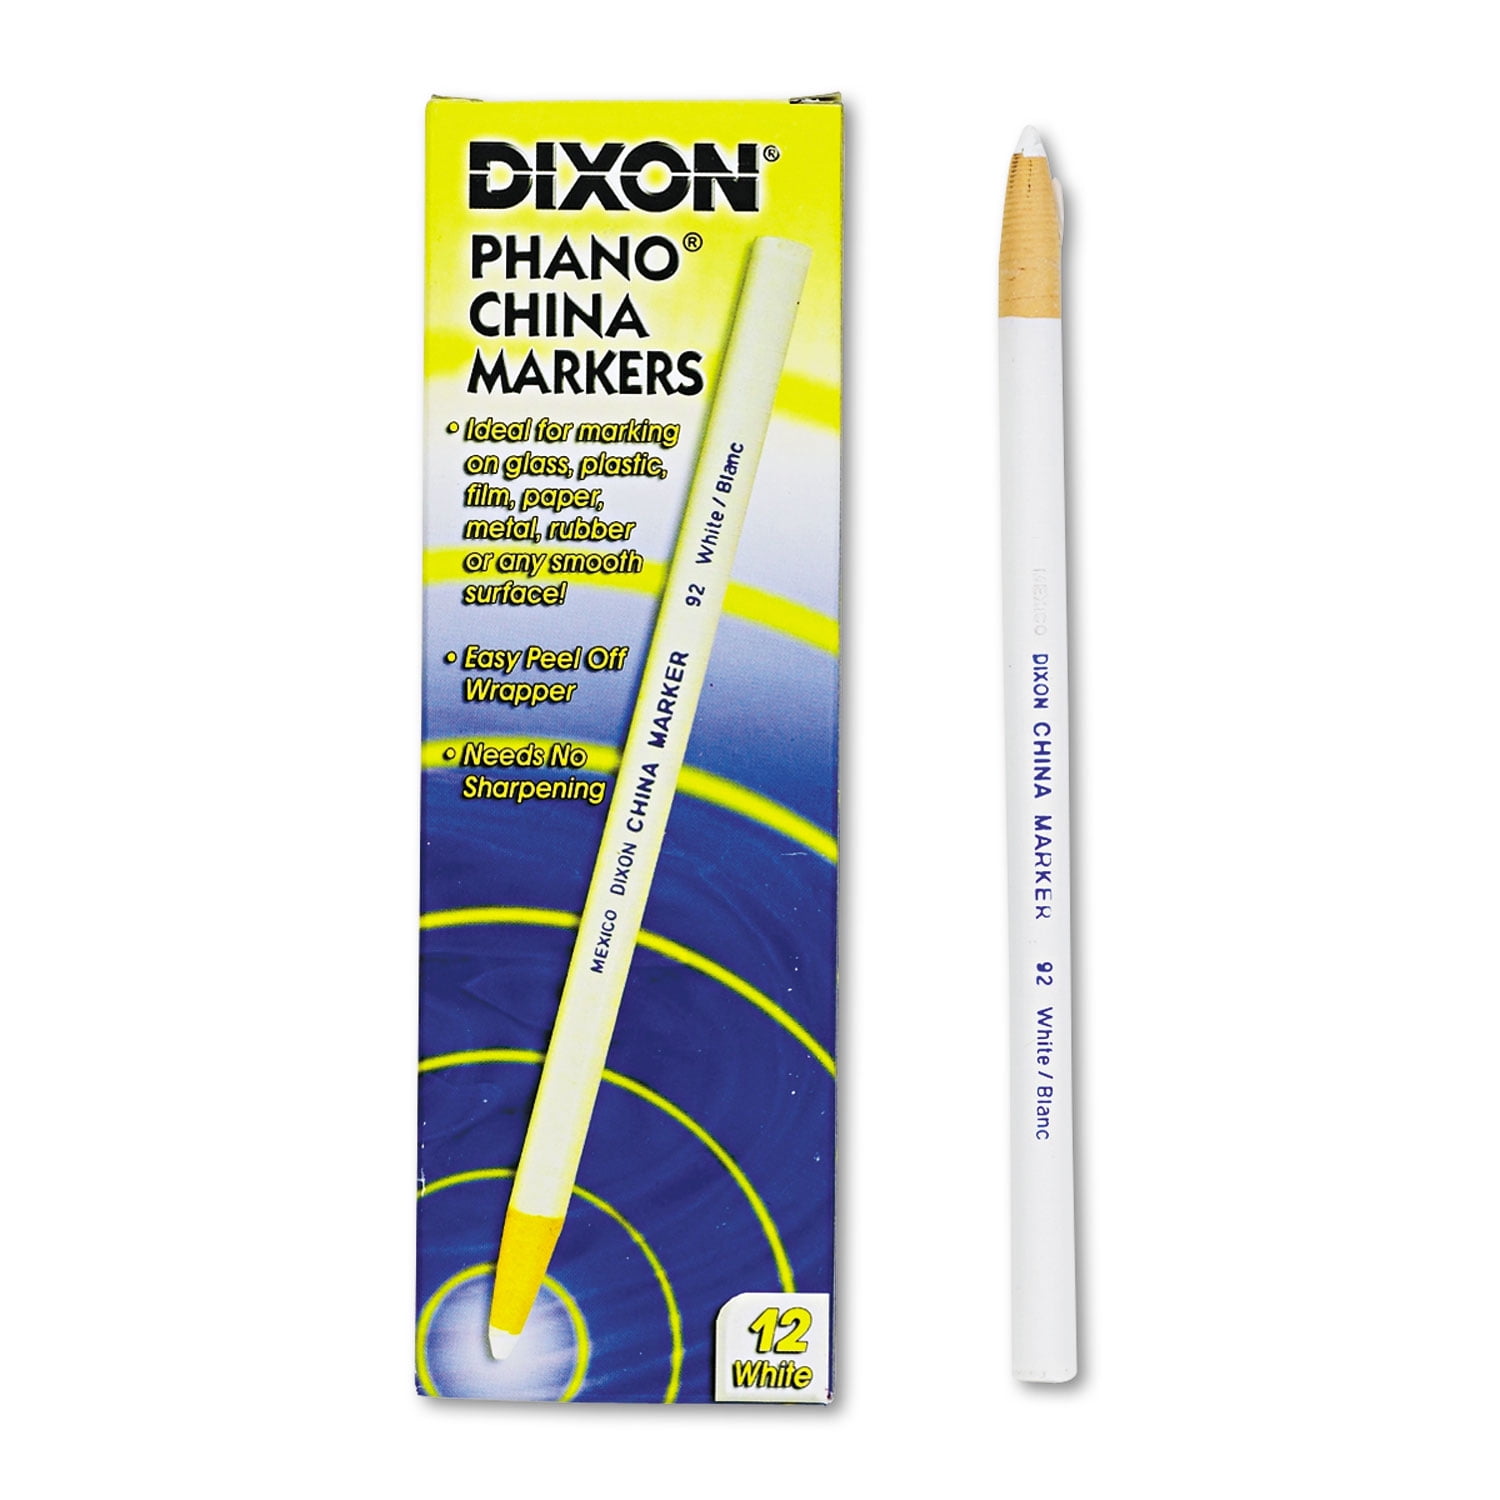 CH Hanson White China Marker (2-Pack) - Power Townsend Company